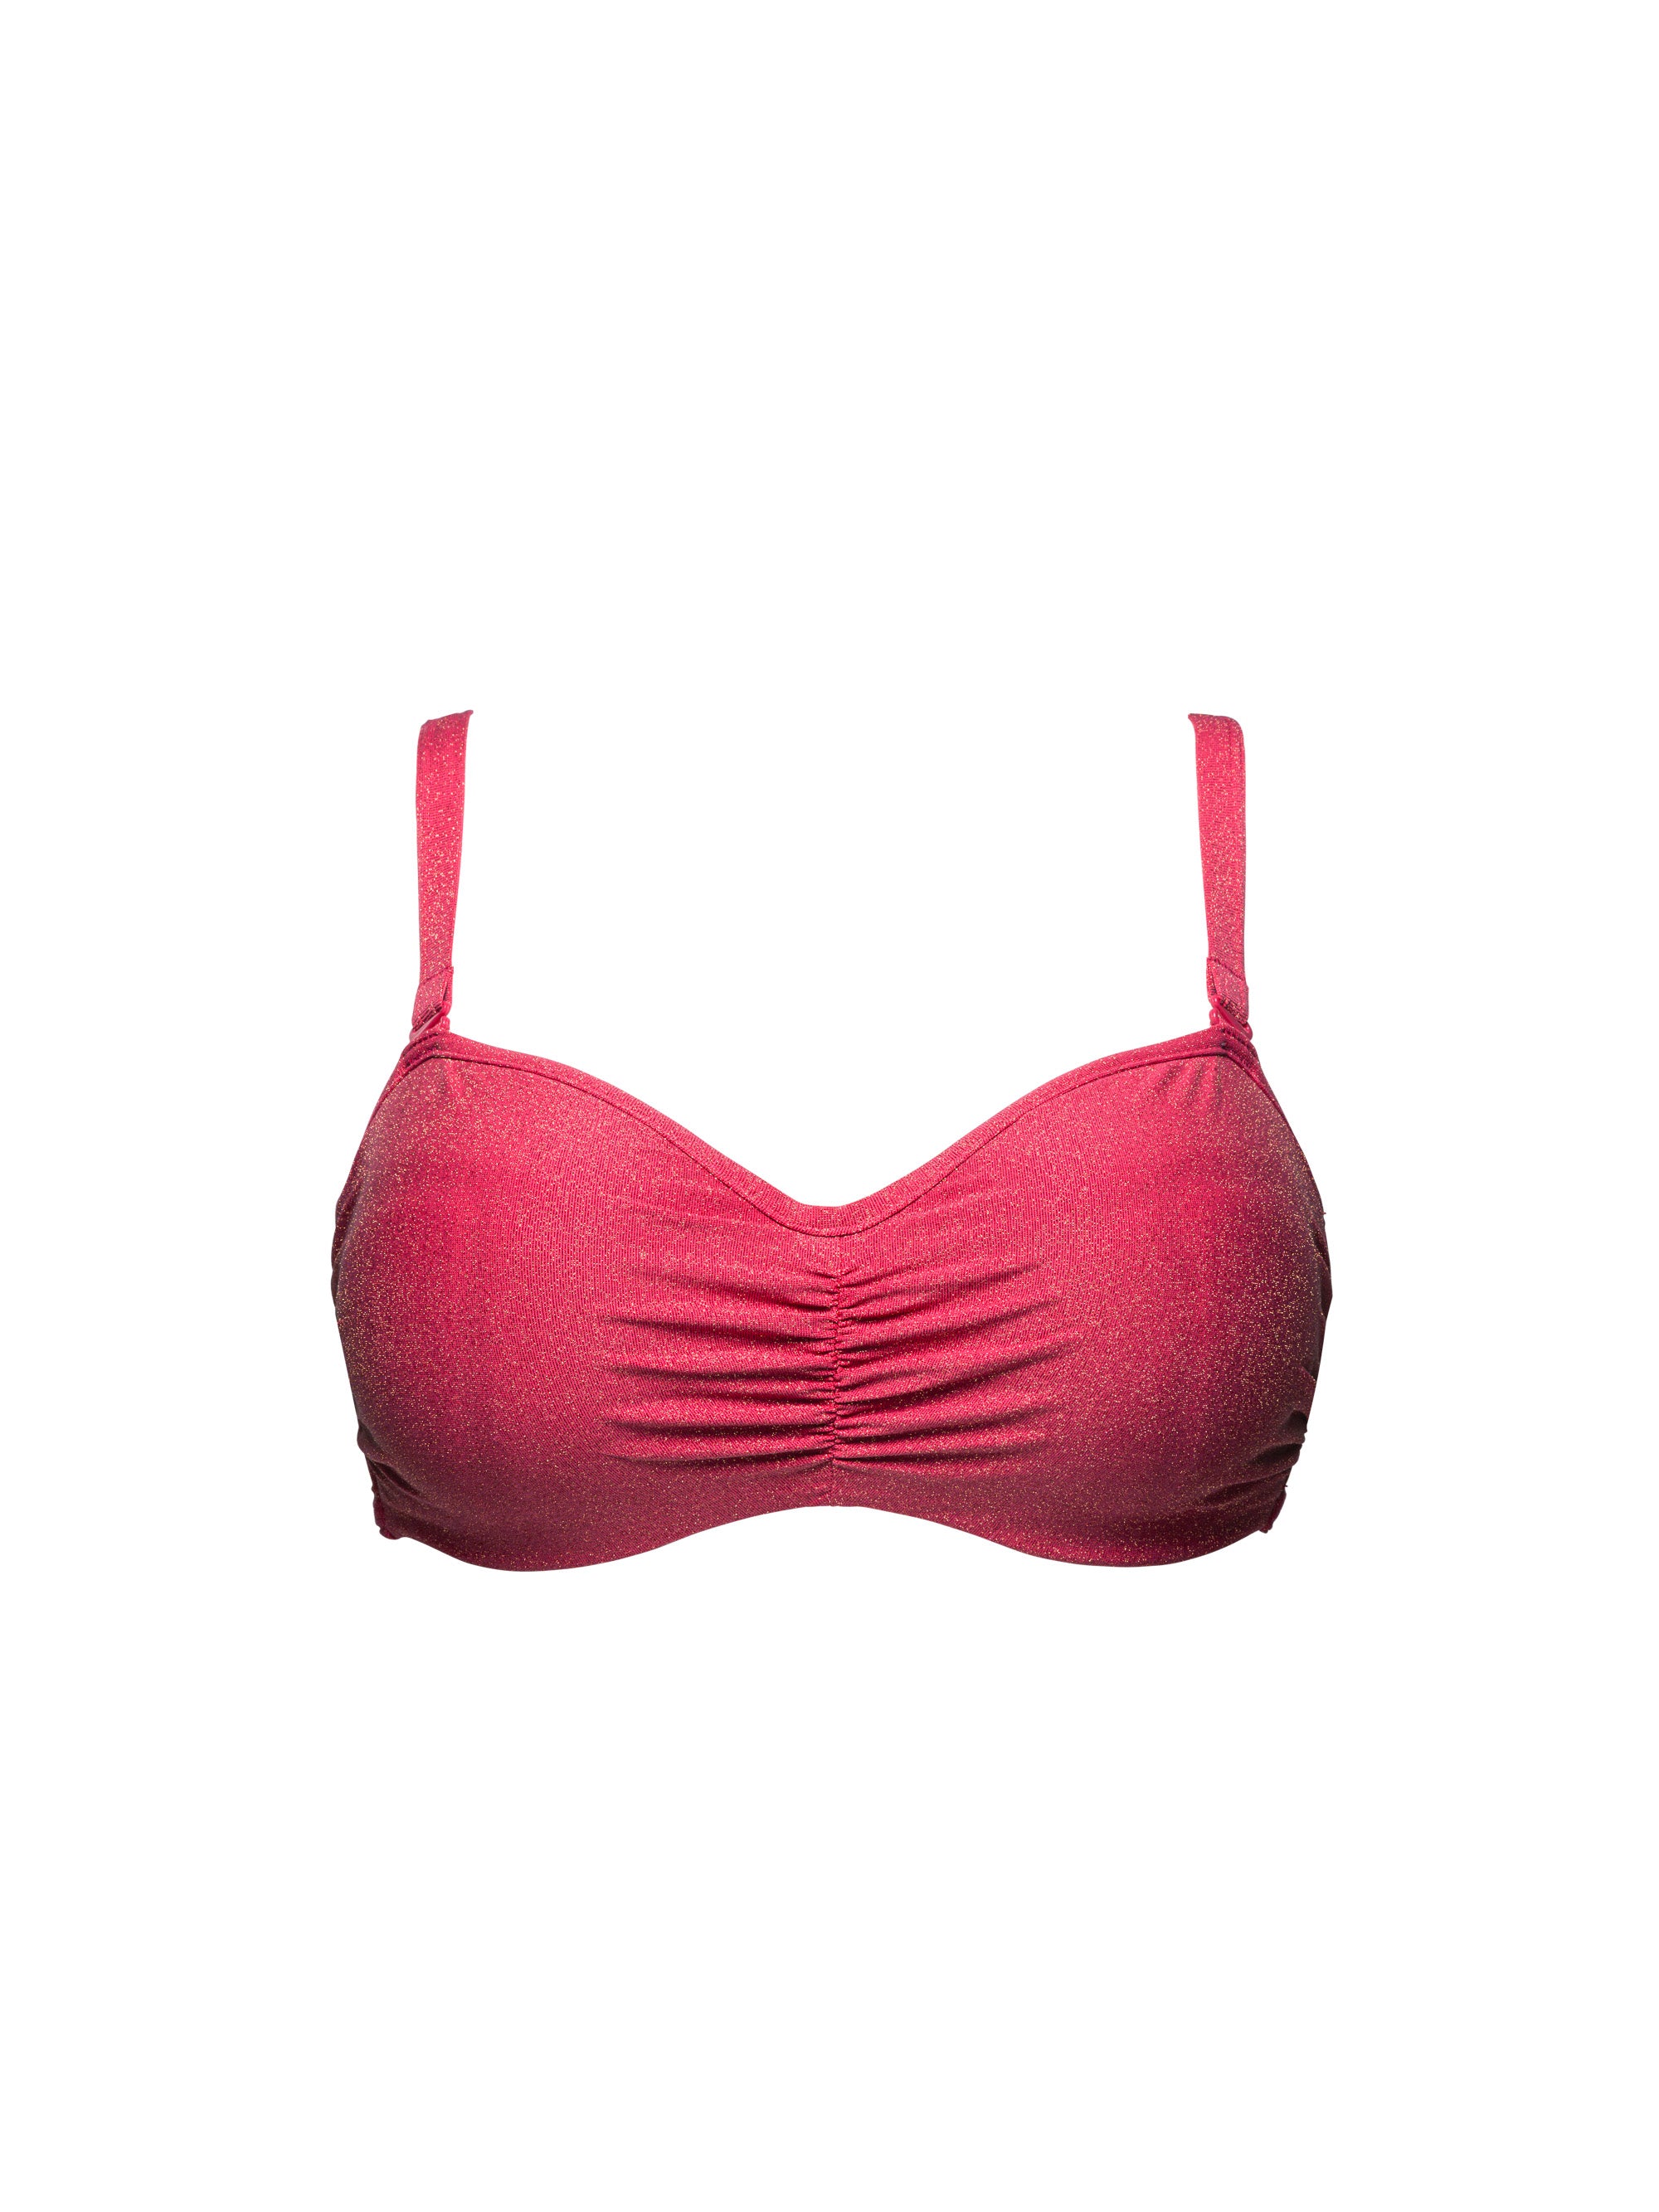 Reflet Cerise underwired bandeau swimsuit top